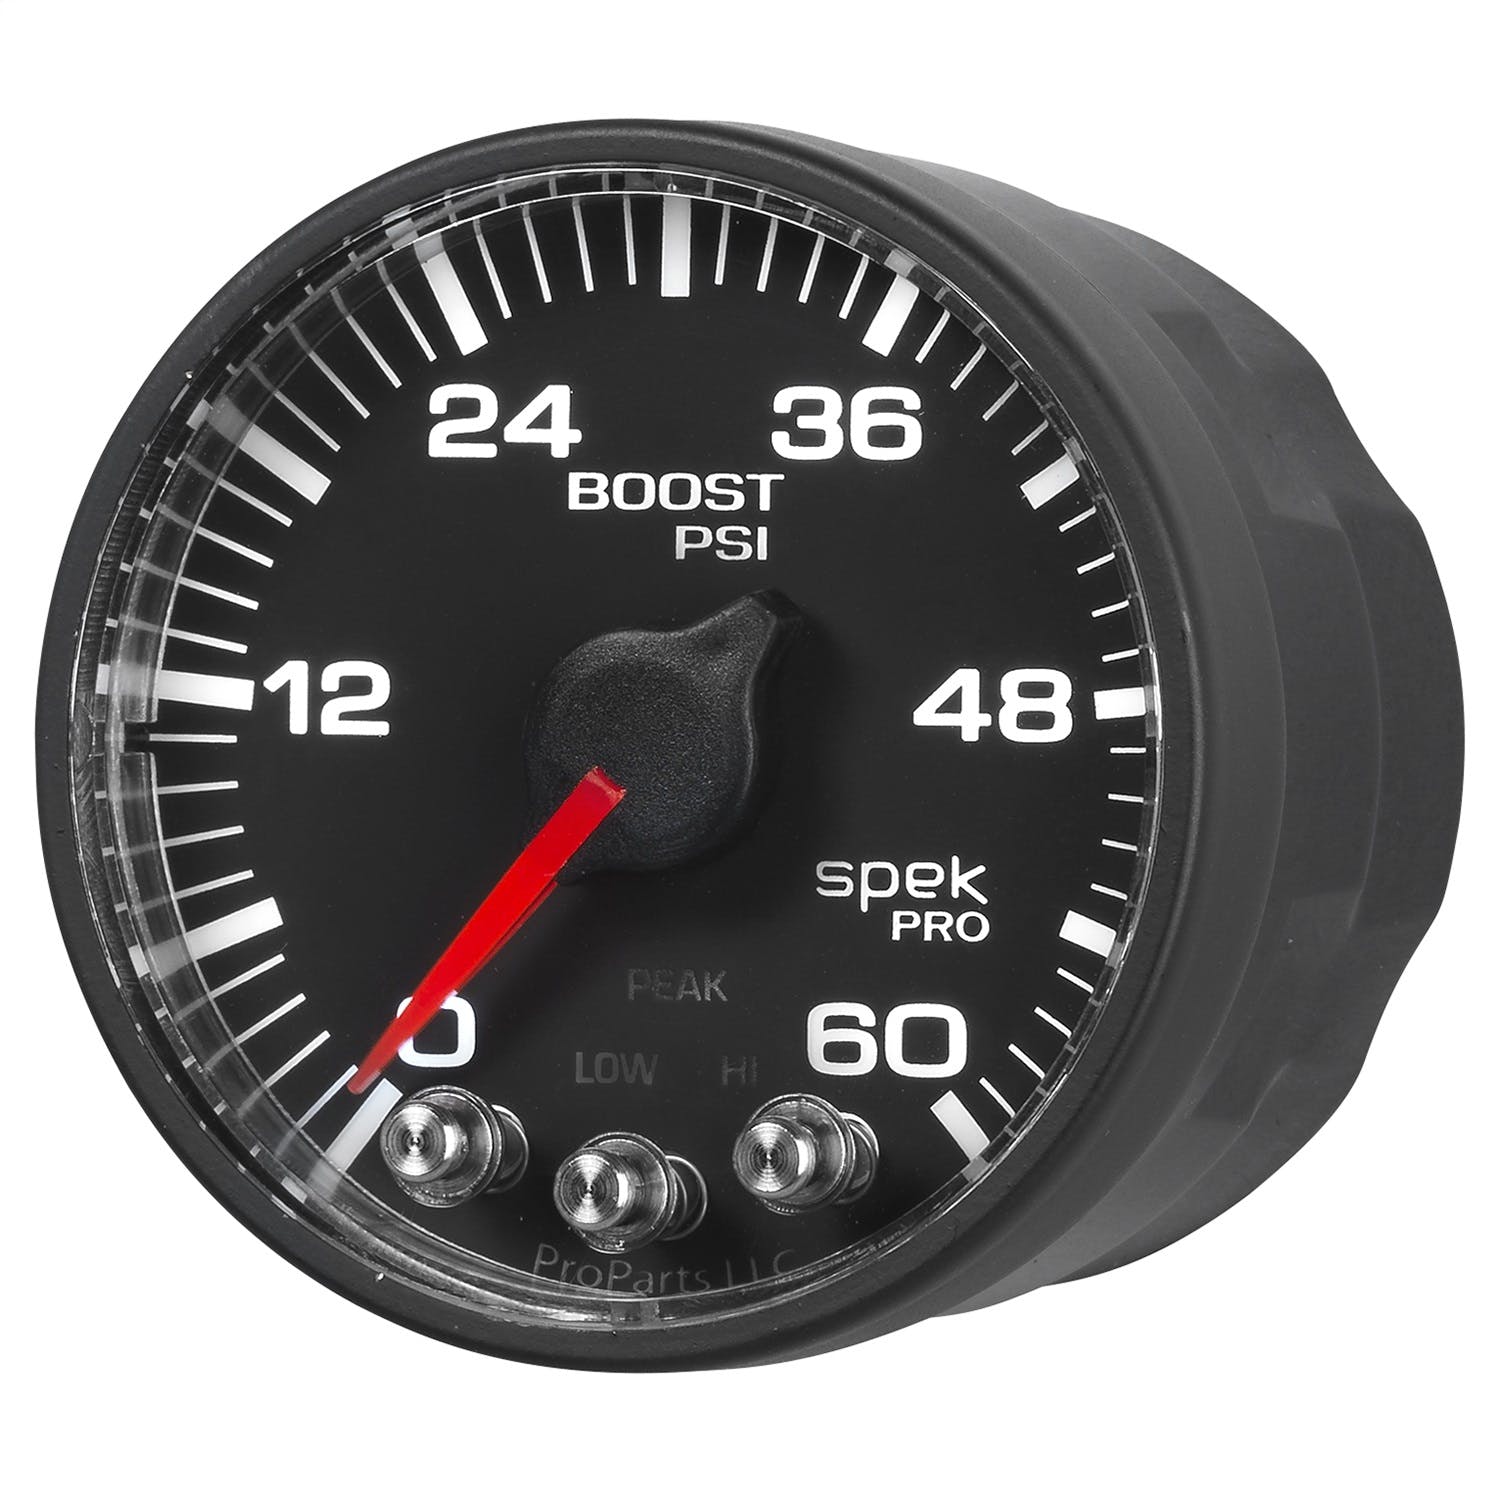 AutoMeter Products P304328 Spek Pro 2-1/16in Boost, 0-60 PSI, Black Dial, Black Bezel